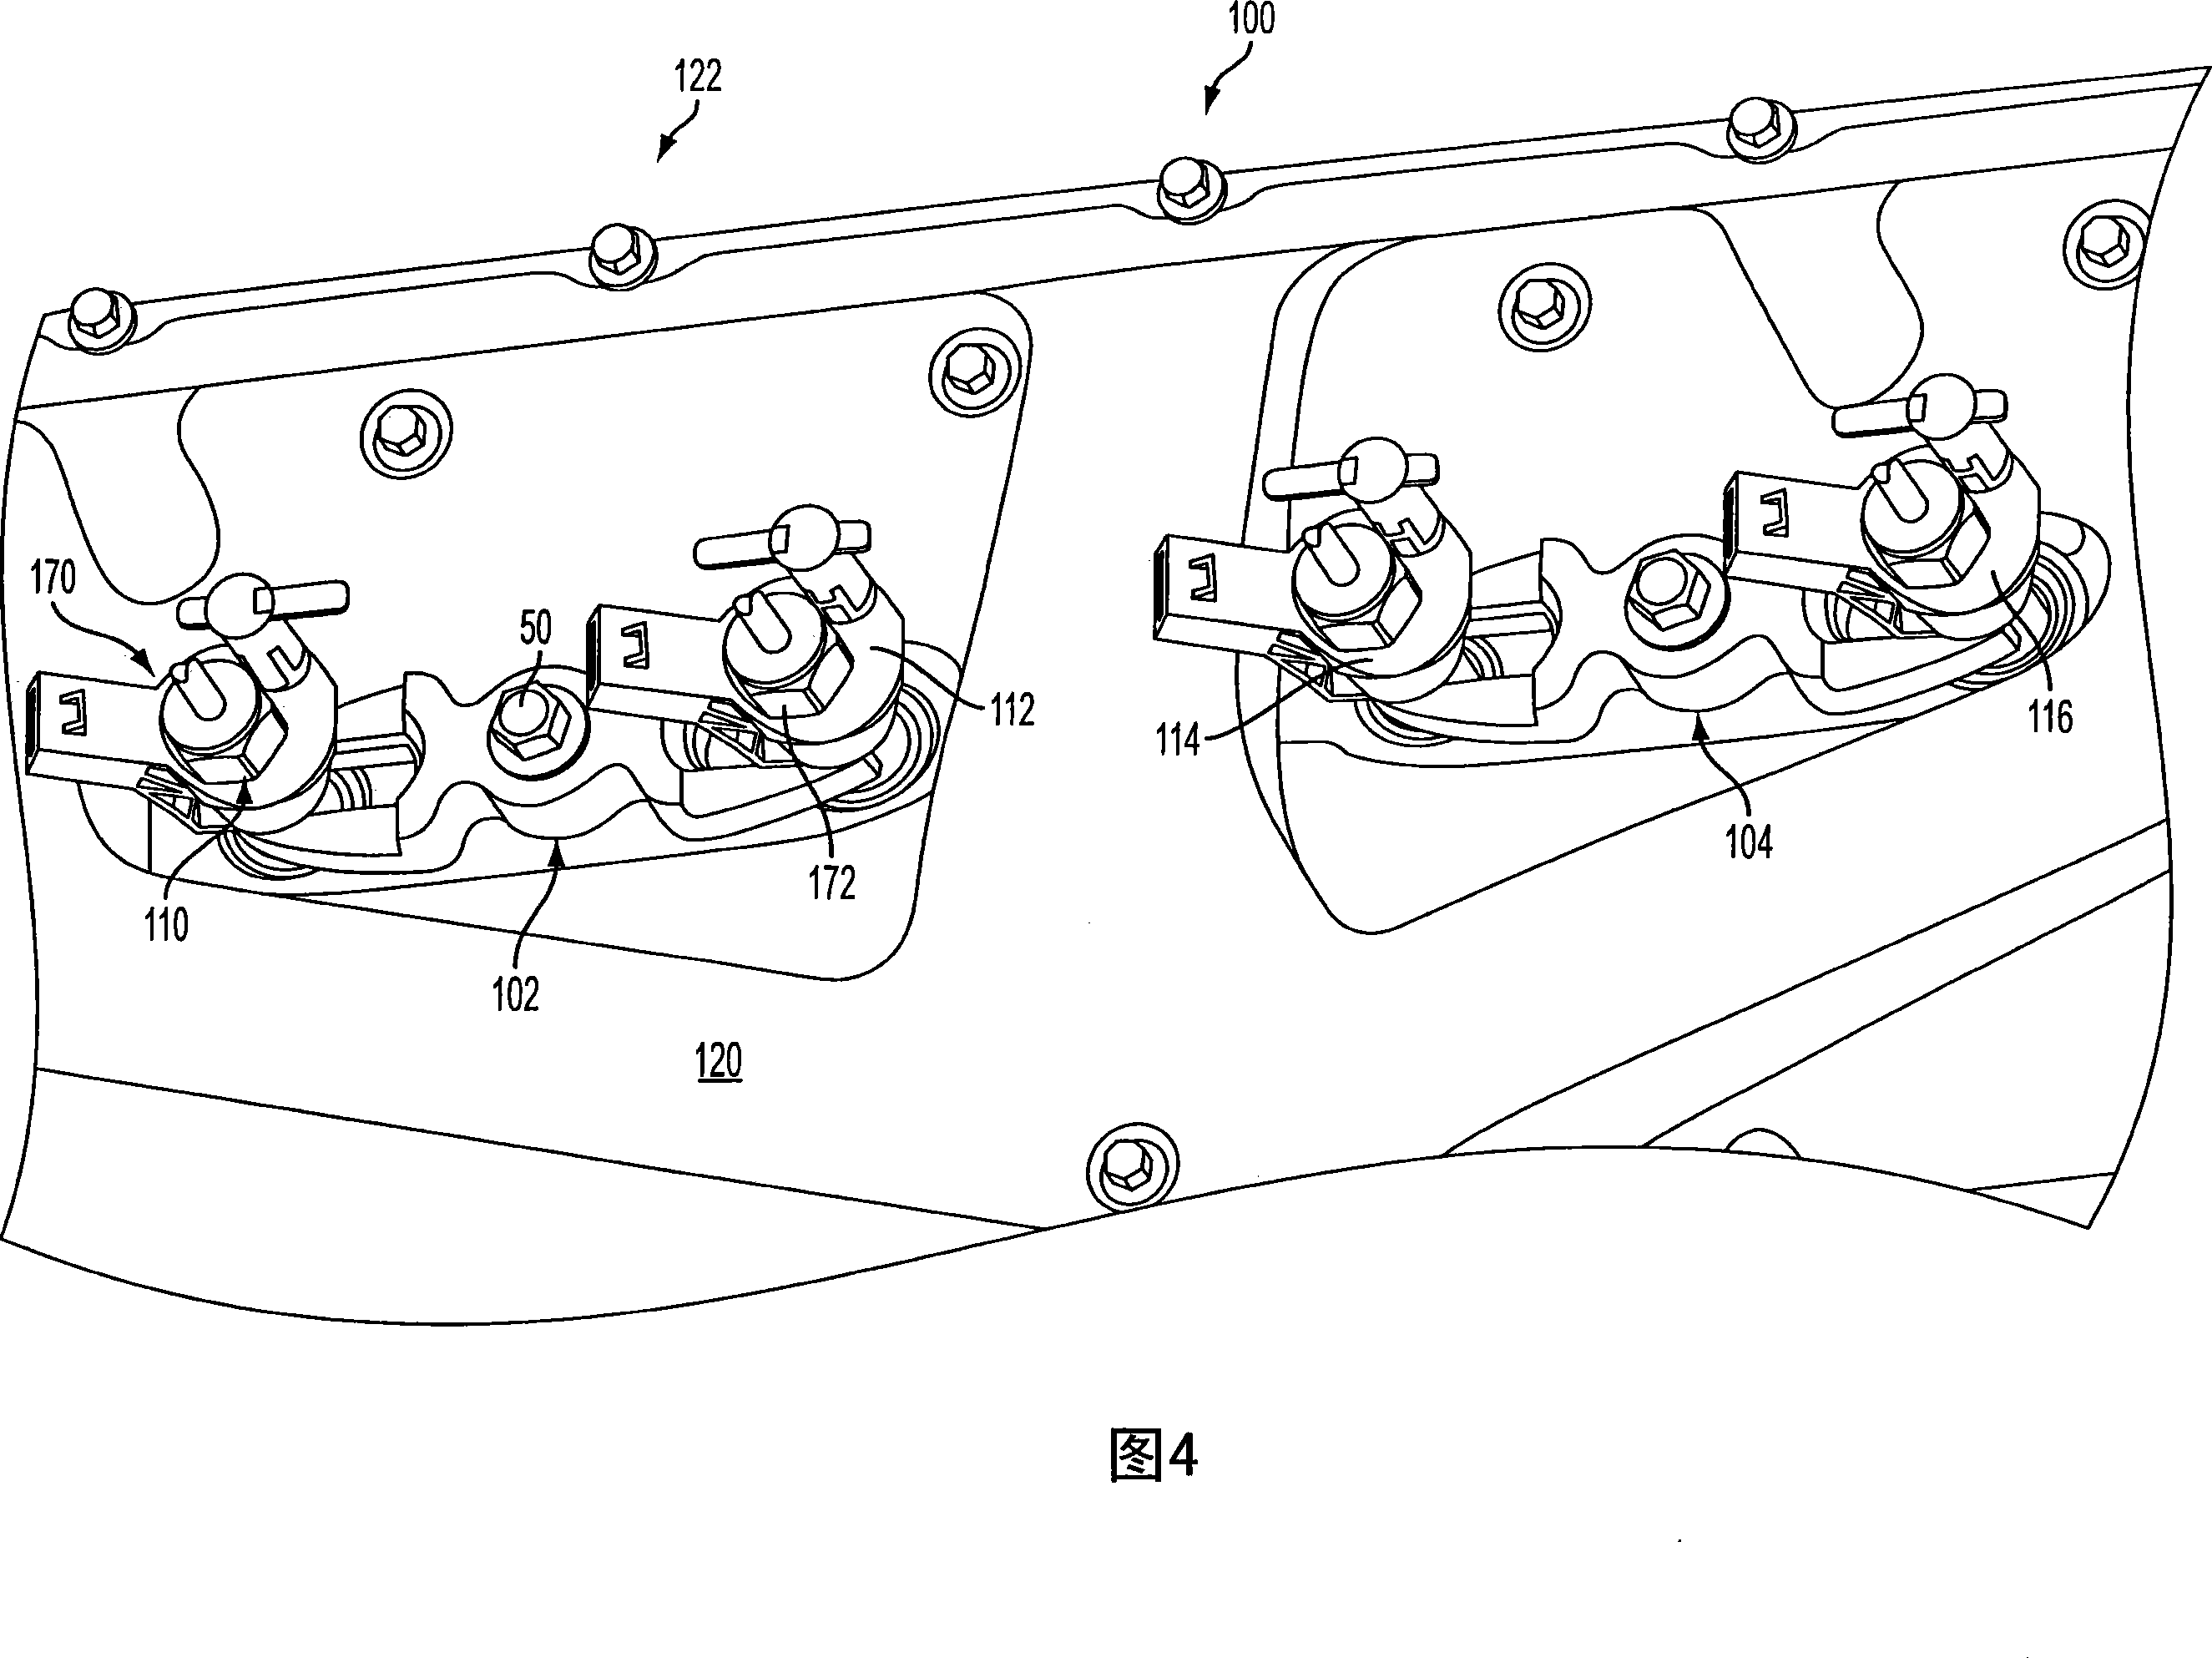 System and method for securing fuel injectors